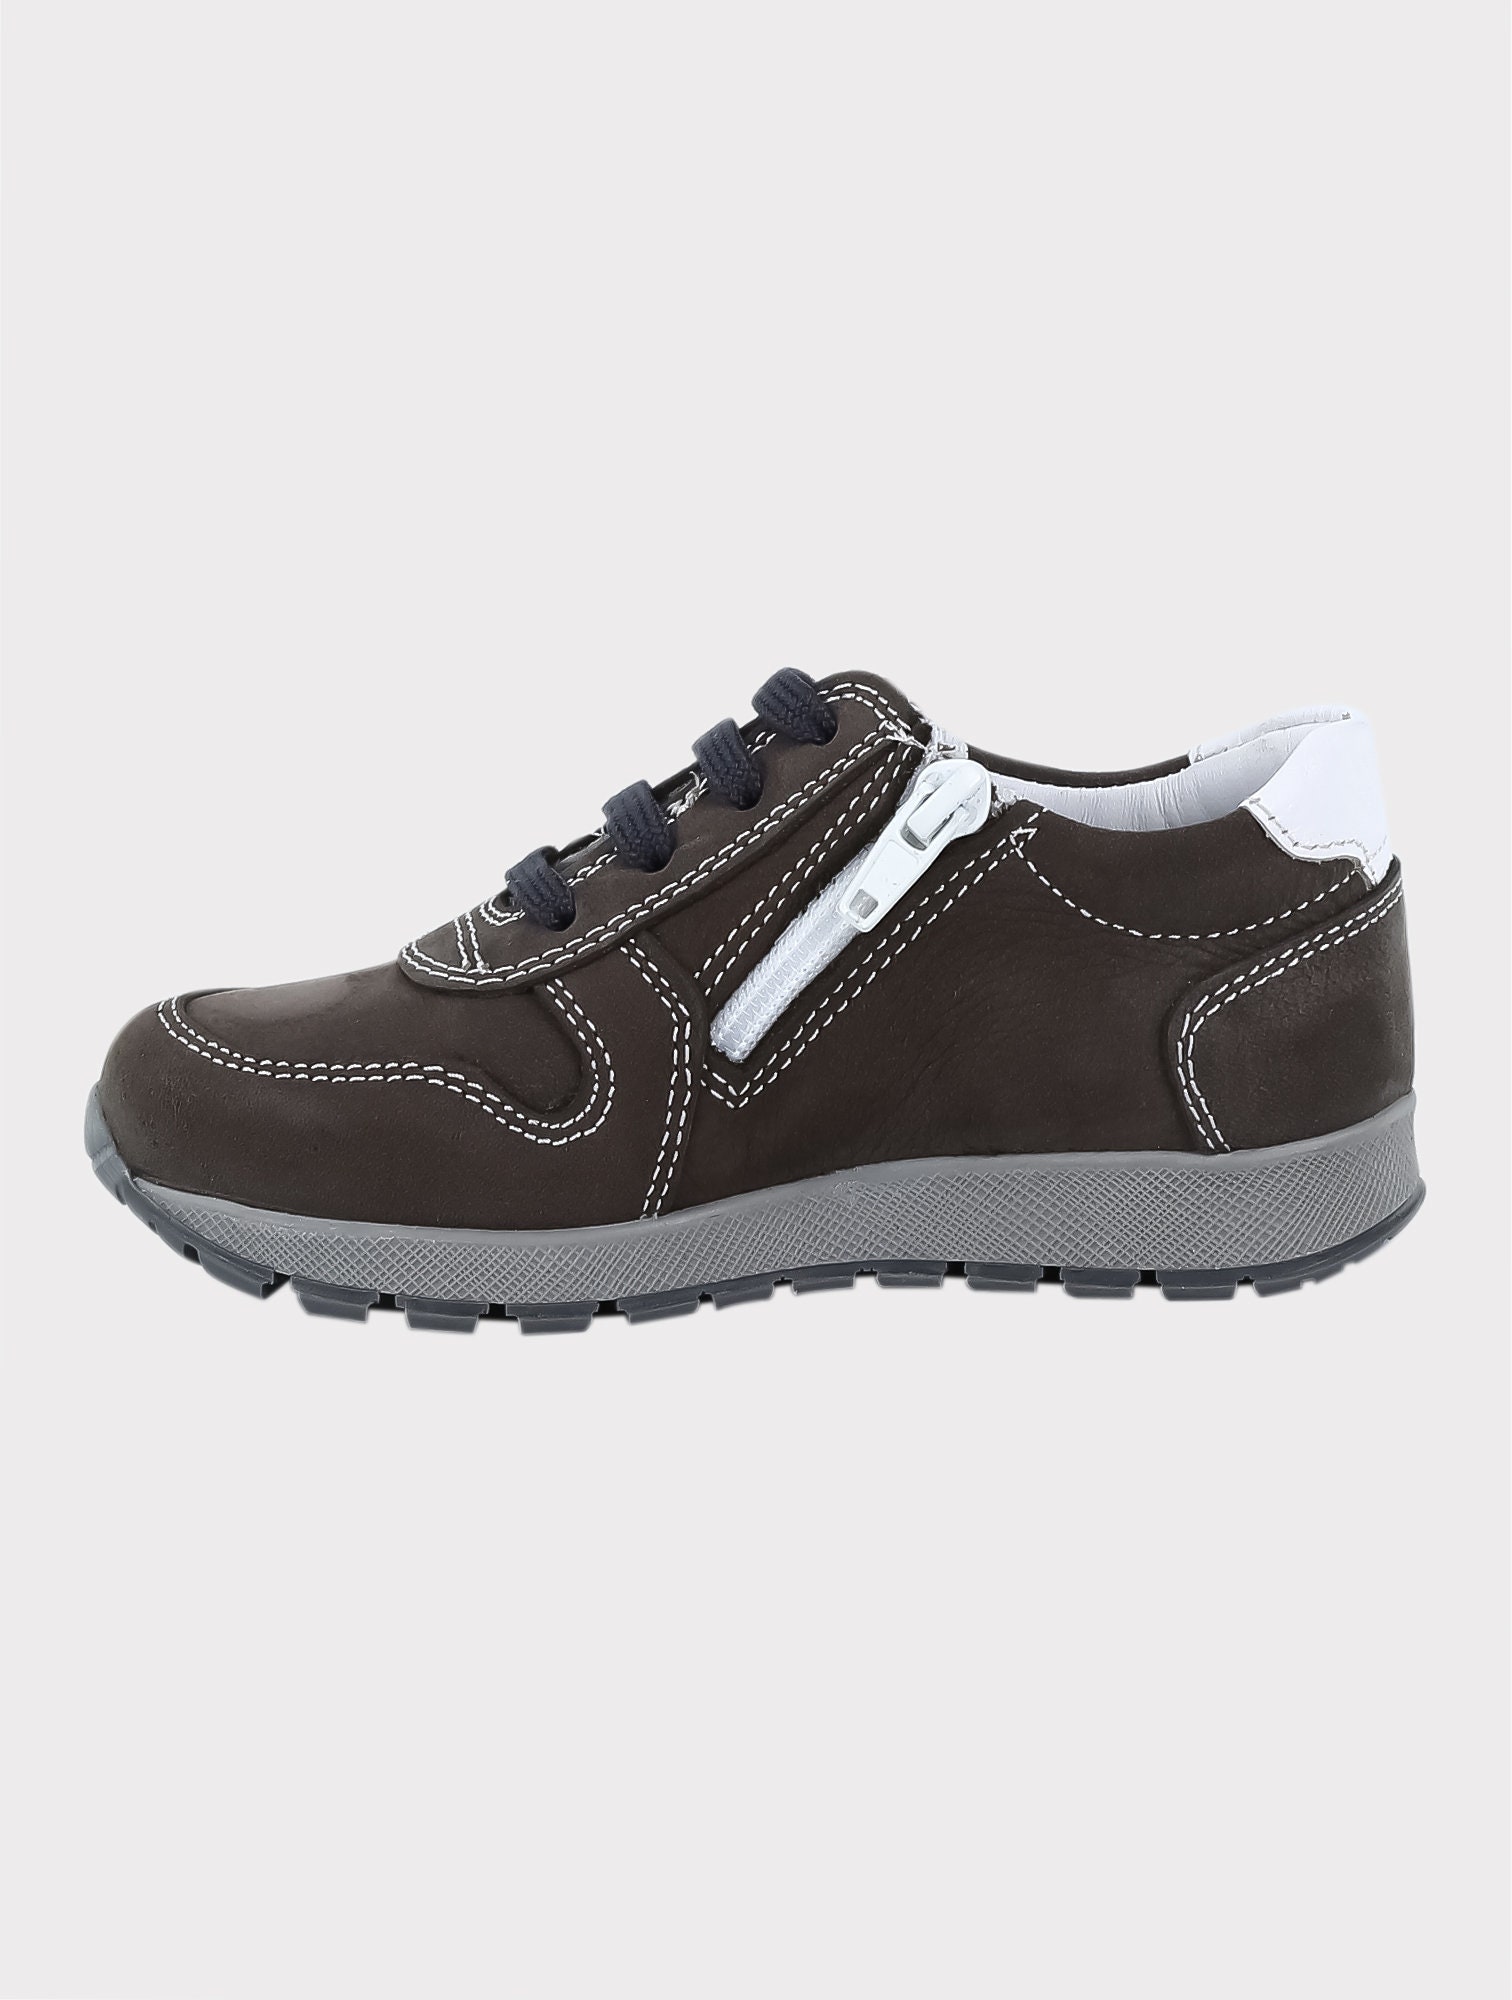 Boys Genuine Leather Casual Sneaker Shoes - Etsy UK